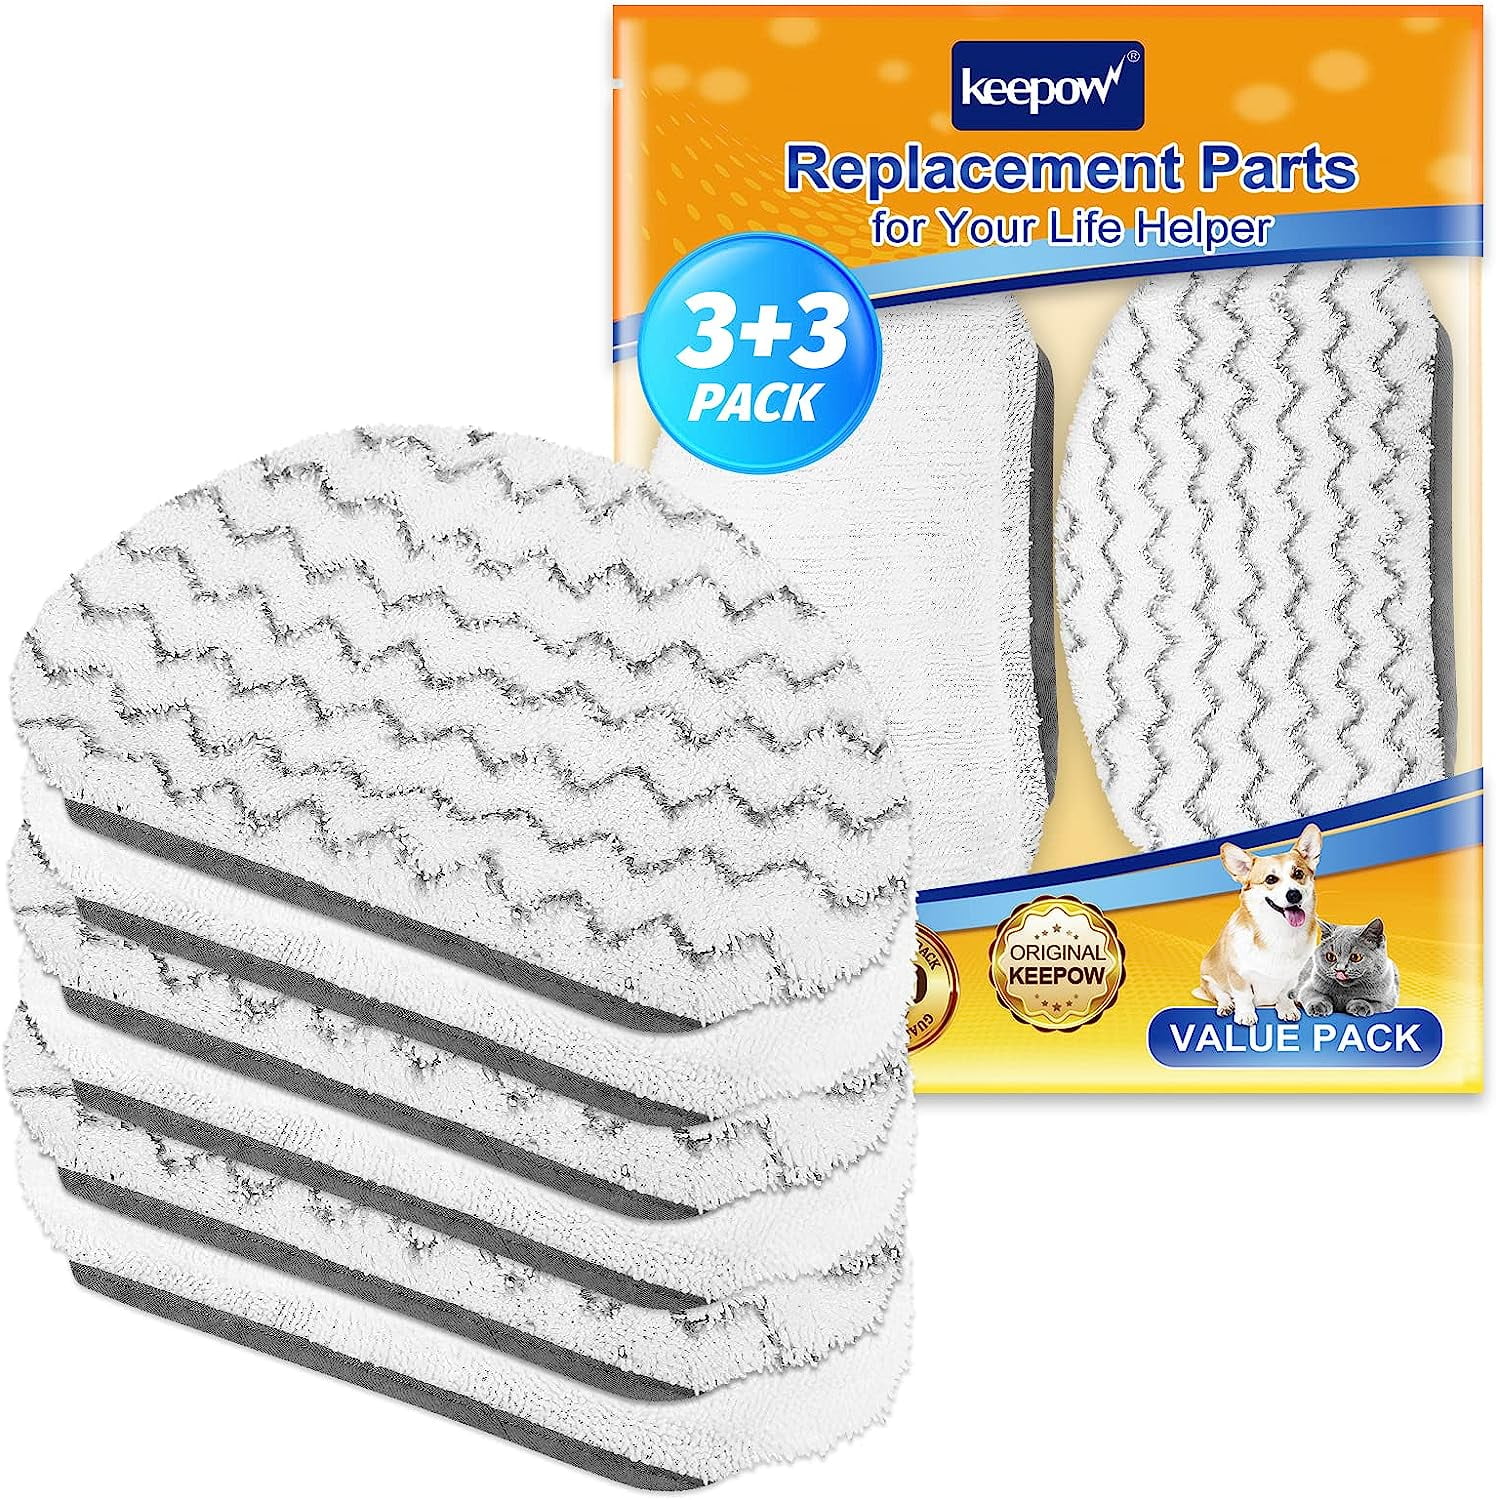 1pc-Steam Mop Cloth Cover Bissell Mop Head Accessories 9in1 Mop Cloth Steam  Mop Cloth Cover Replacement Pad